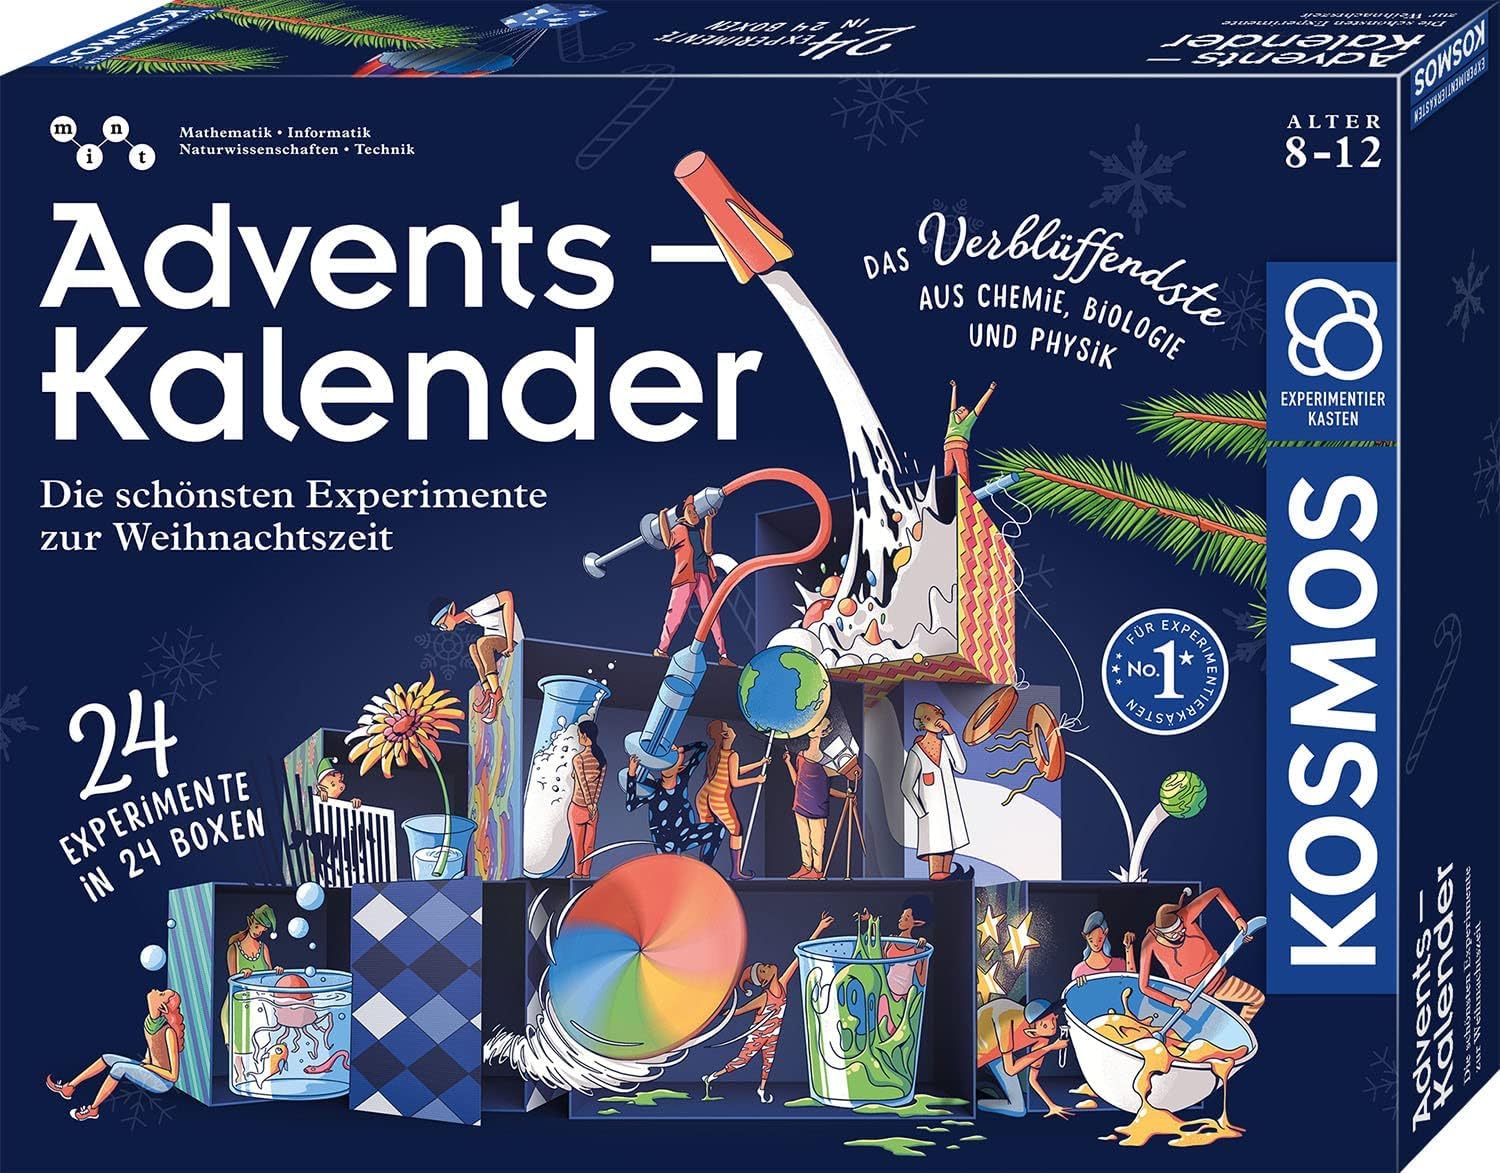 KOSMOS 661007 Advent Calendar - The Most Beautiful Experiments at Christmas Time, Easy to Understand, in 5 Minutes, for Children from 8-12 Years, Toy Advent Calendar, Science Advent Calendar
